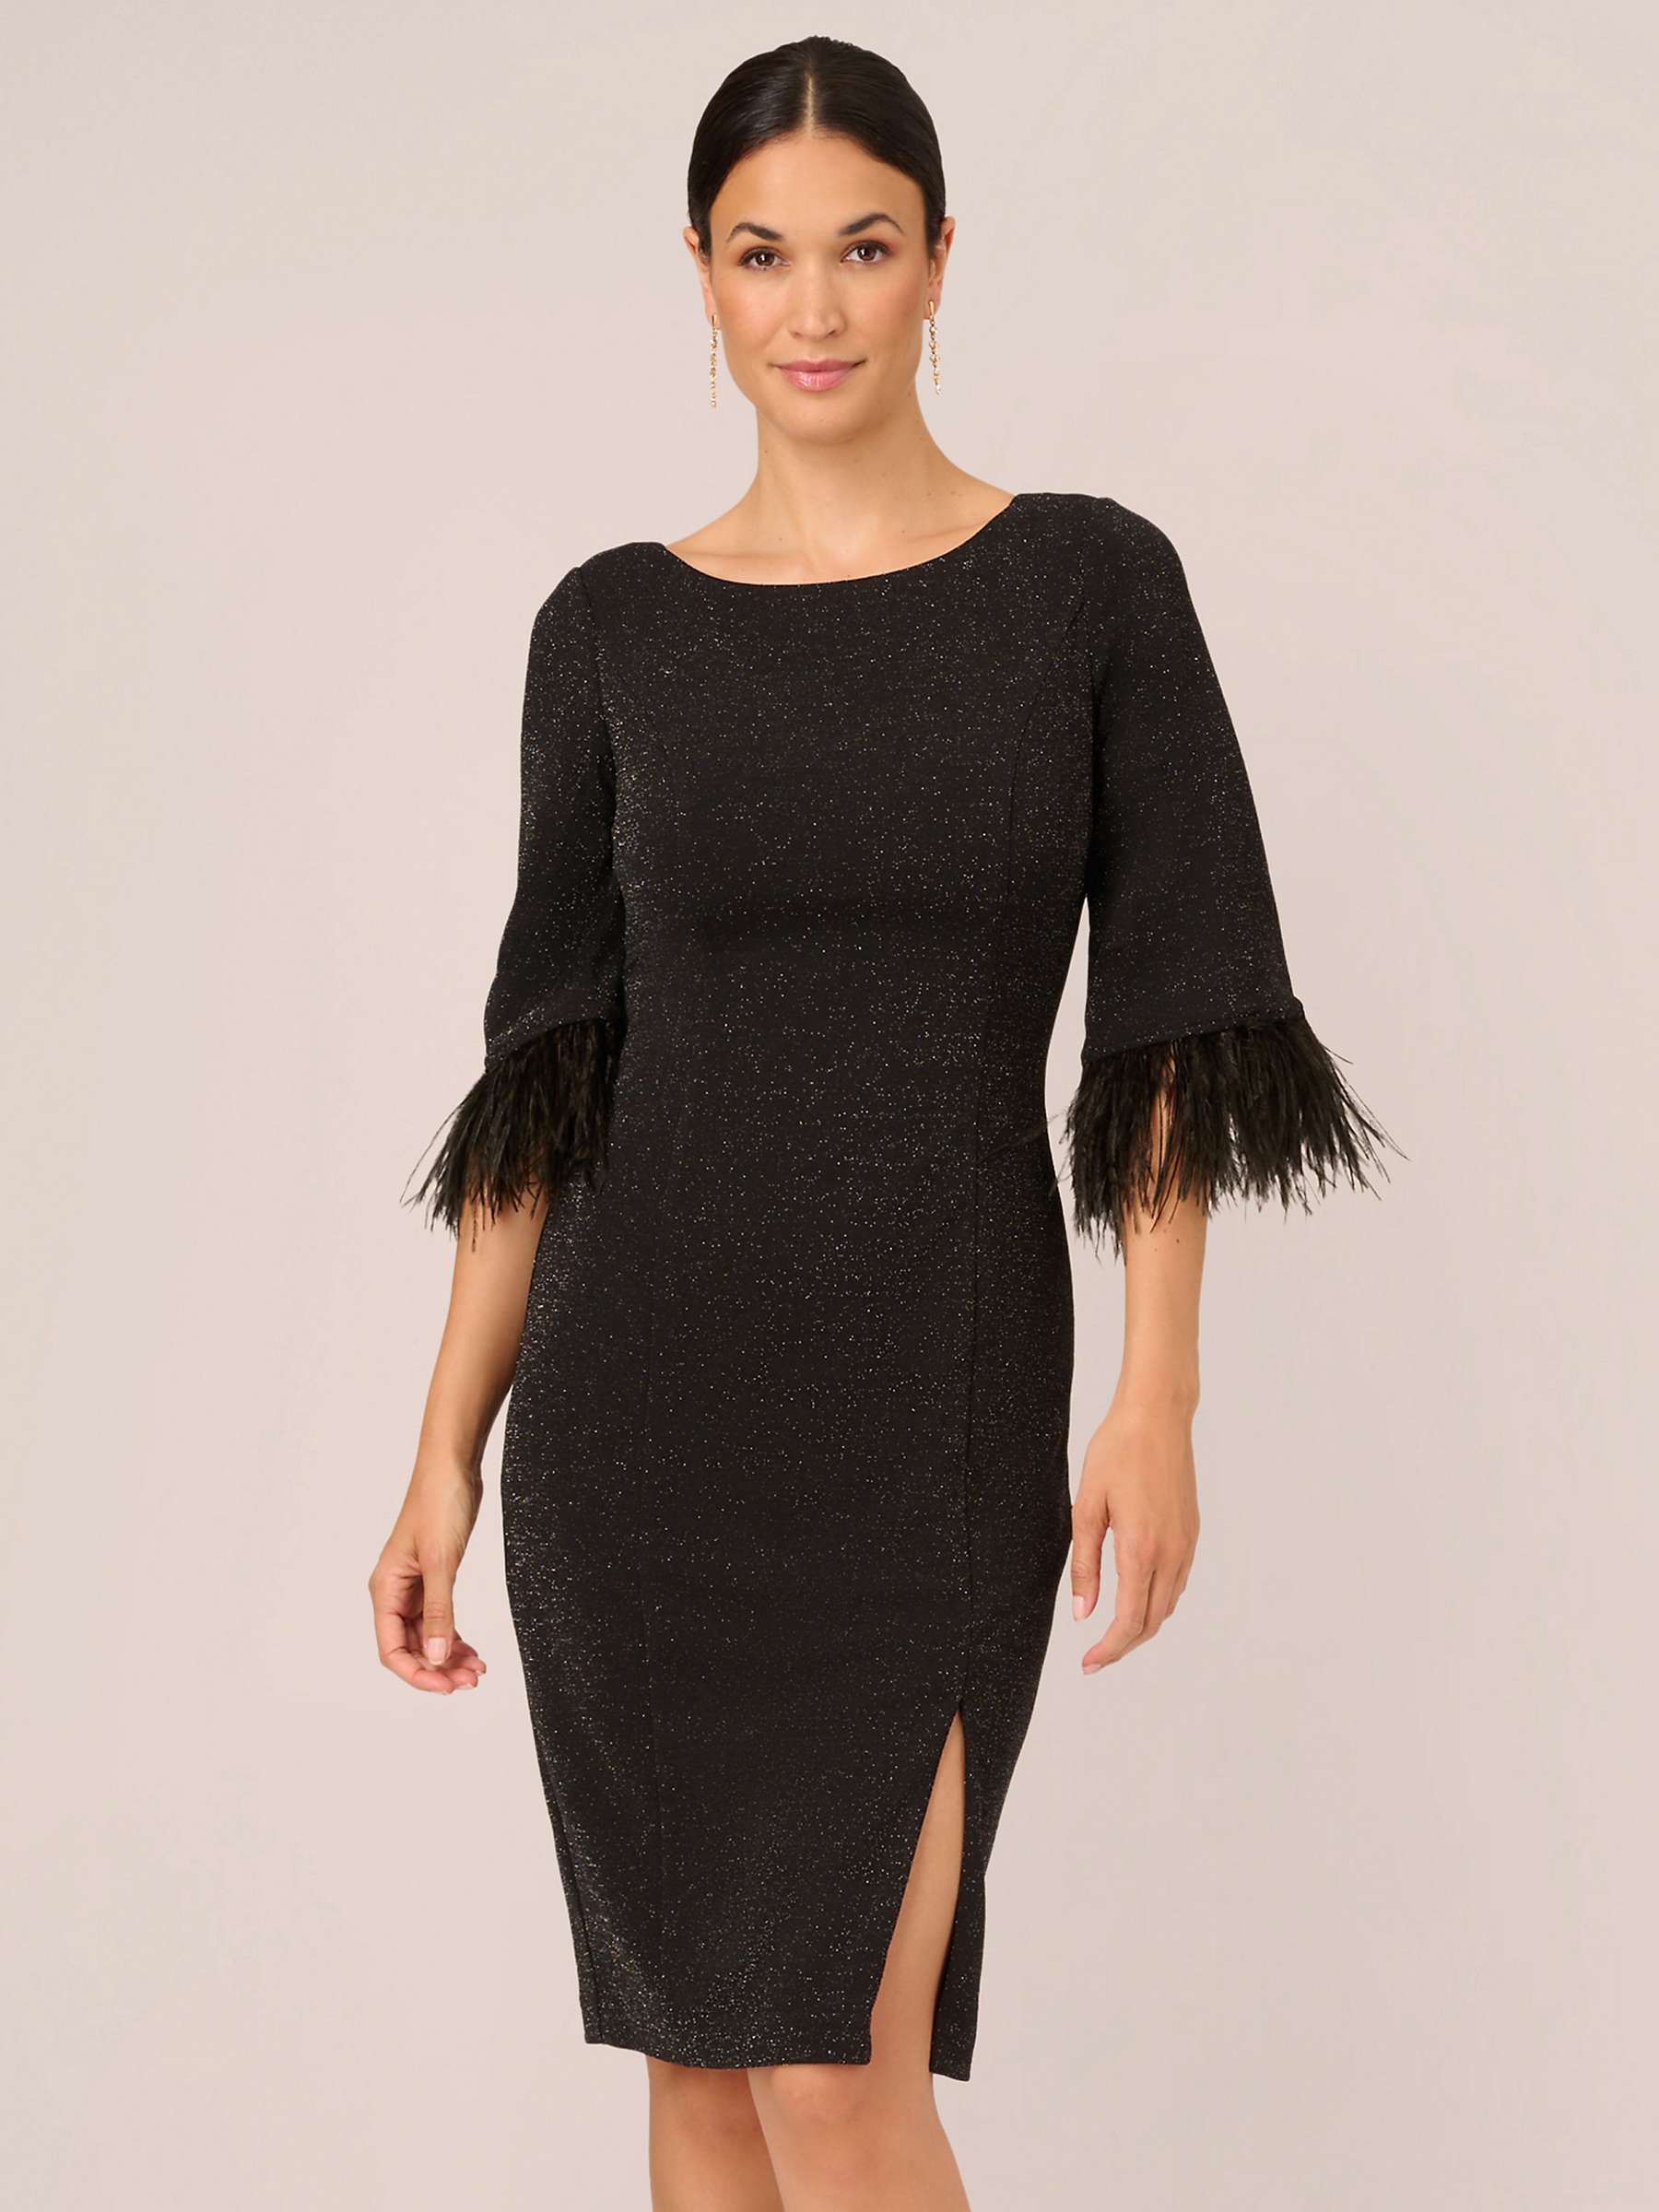 Buy Adrianna Papell Metallic Knit Feather Dress, Black Online at johnlewis.com